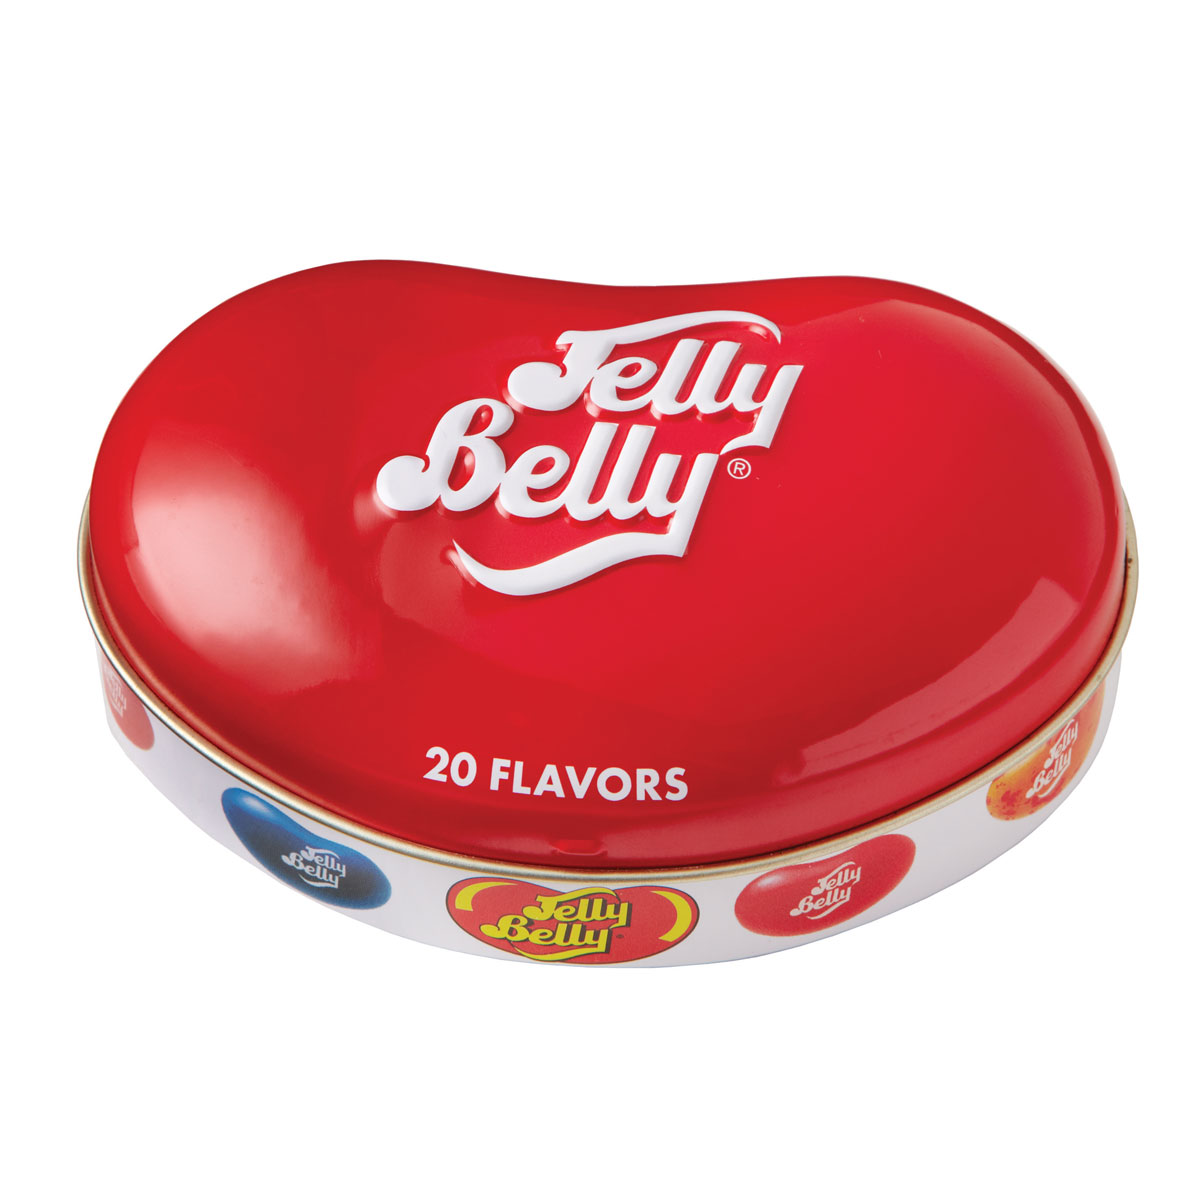 Jelly Belly Bean Tin with 1.7 oz of assorted flavor jelly beans. The bean-shaped container can be refilled with other candy!